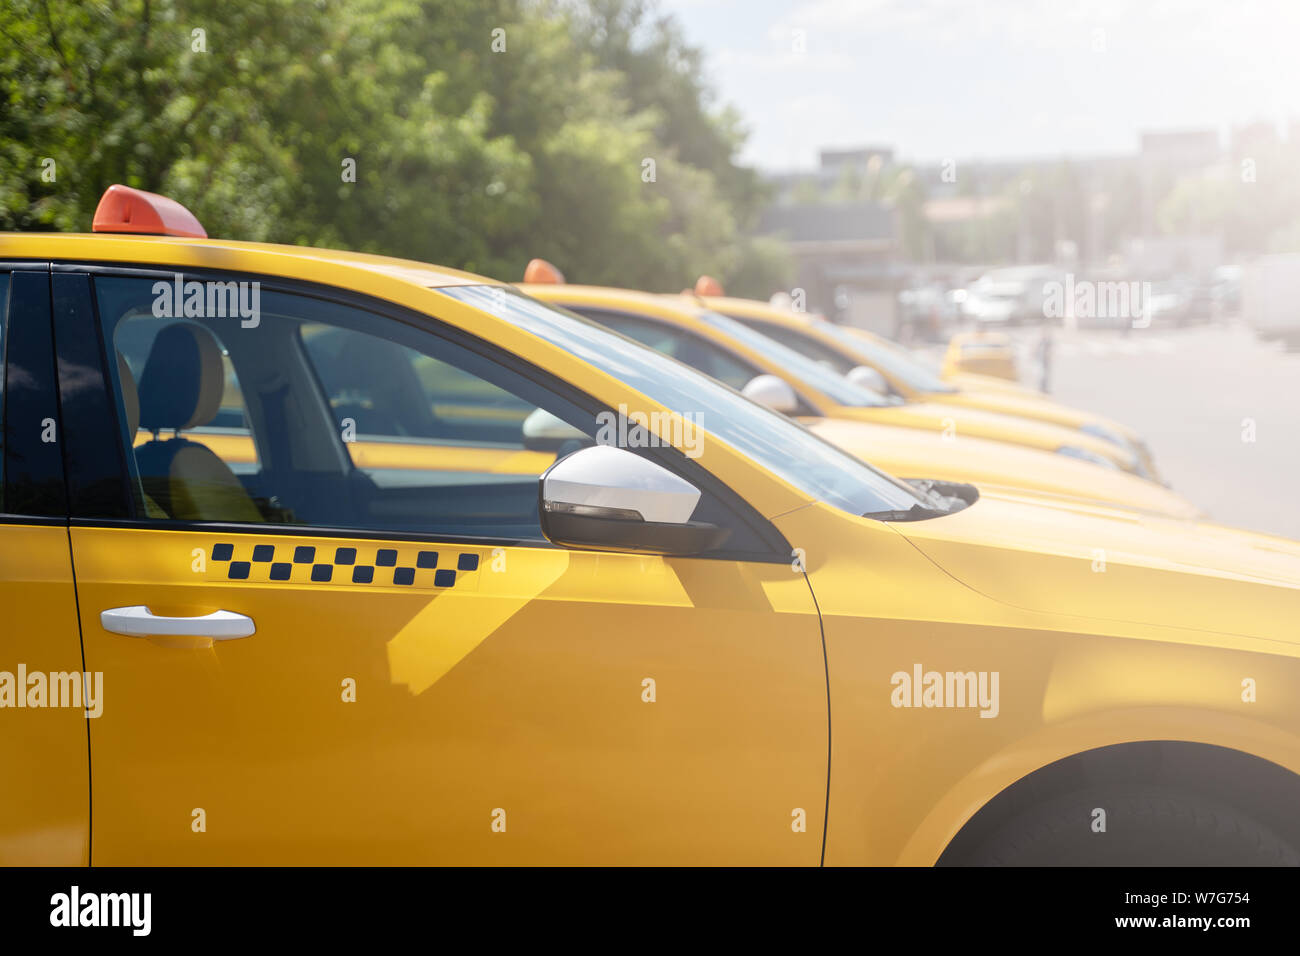 Image of yellow taxi on street in summer Stock Photo